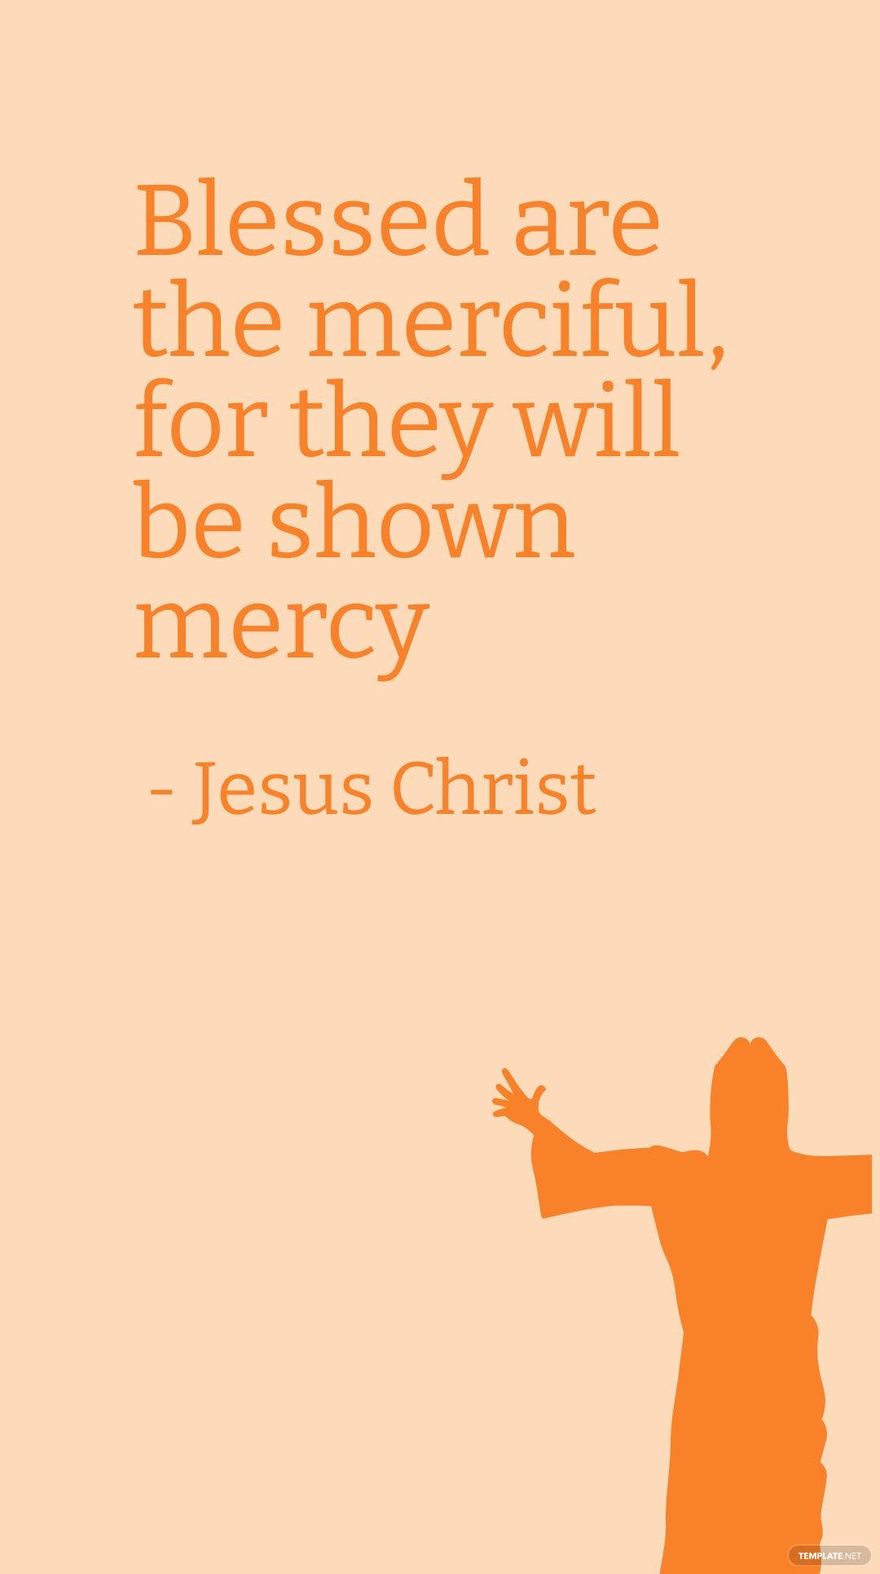 Free Jesus Christ - Blessed are the merciful, for they will be shown mercy in JPG